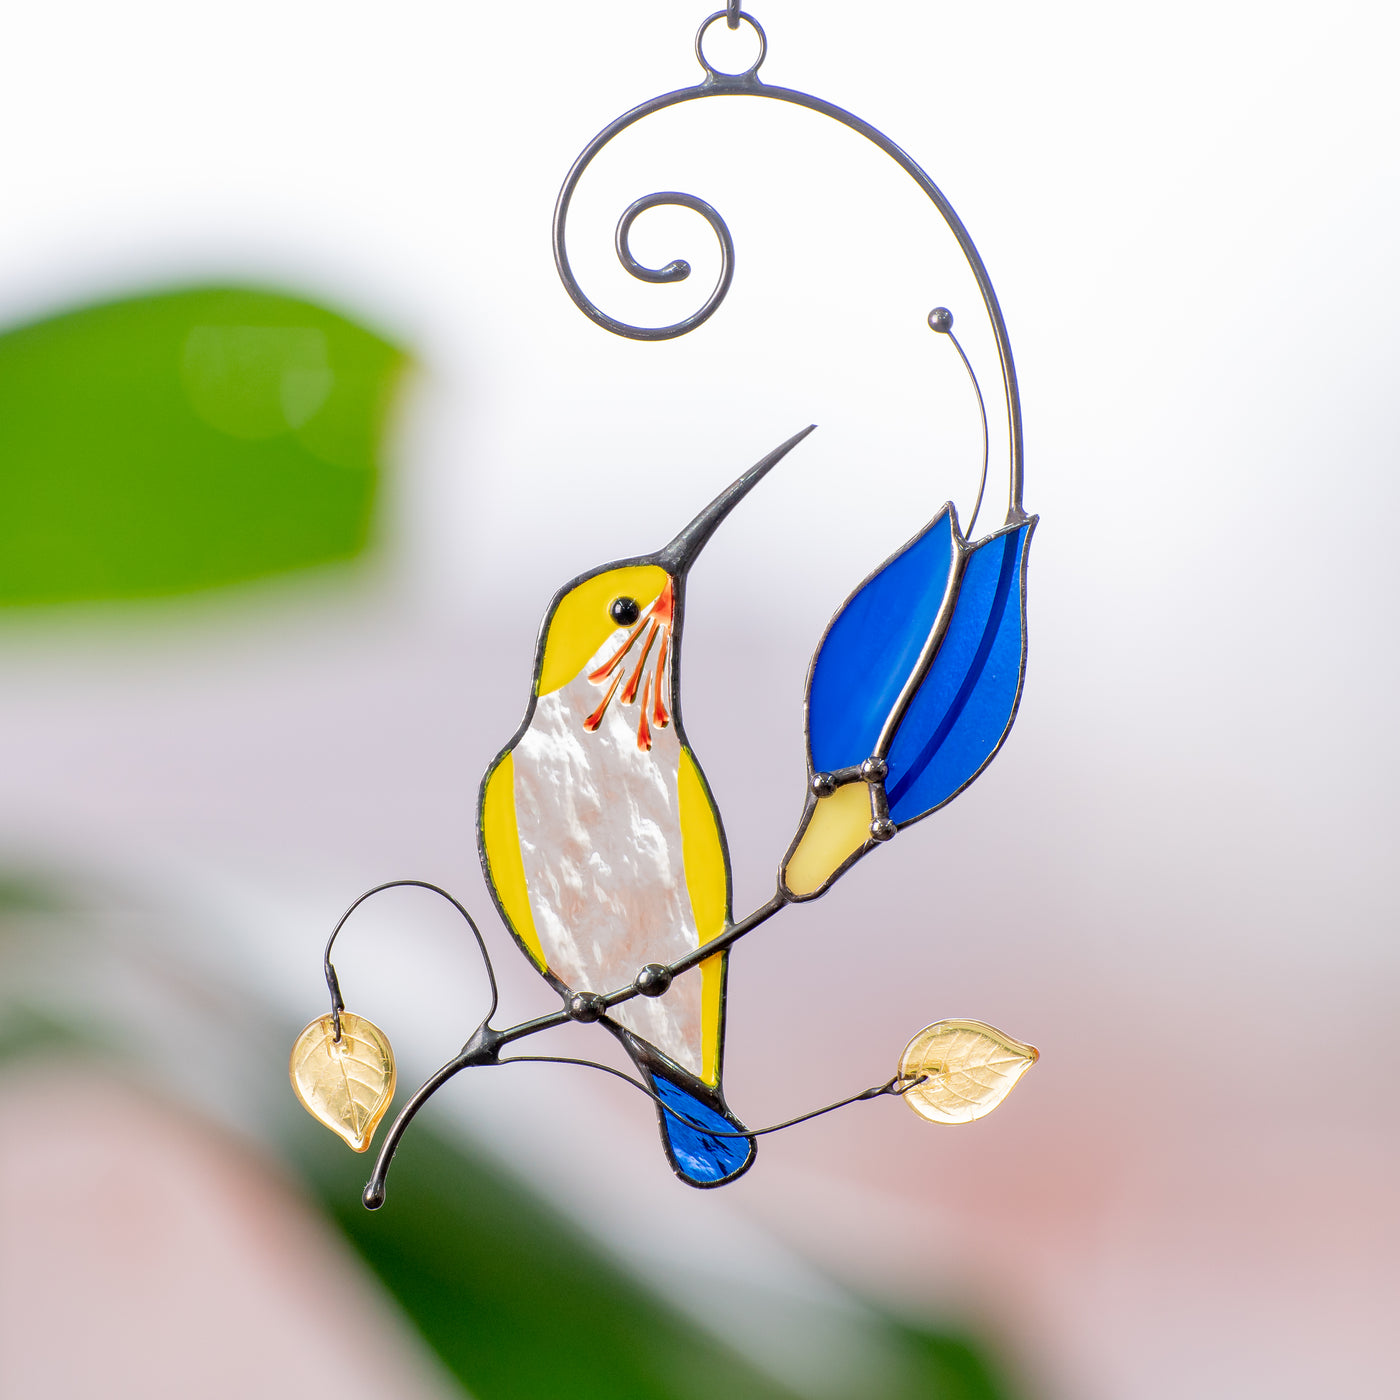 Stained glass window hanging of a yellow hummingbird with a blue tail sitting on the branch with the blue flower